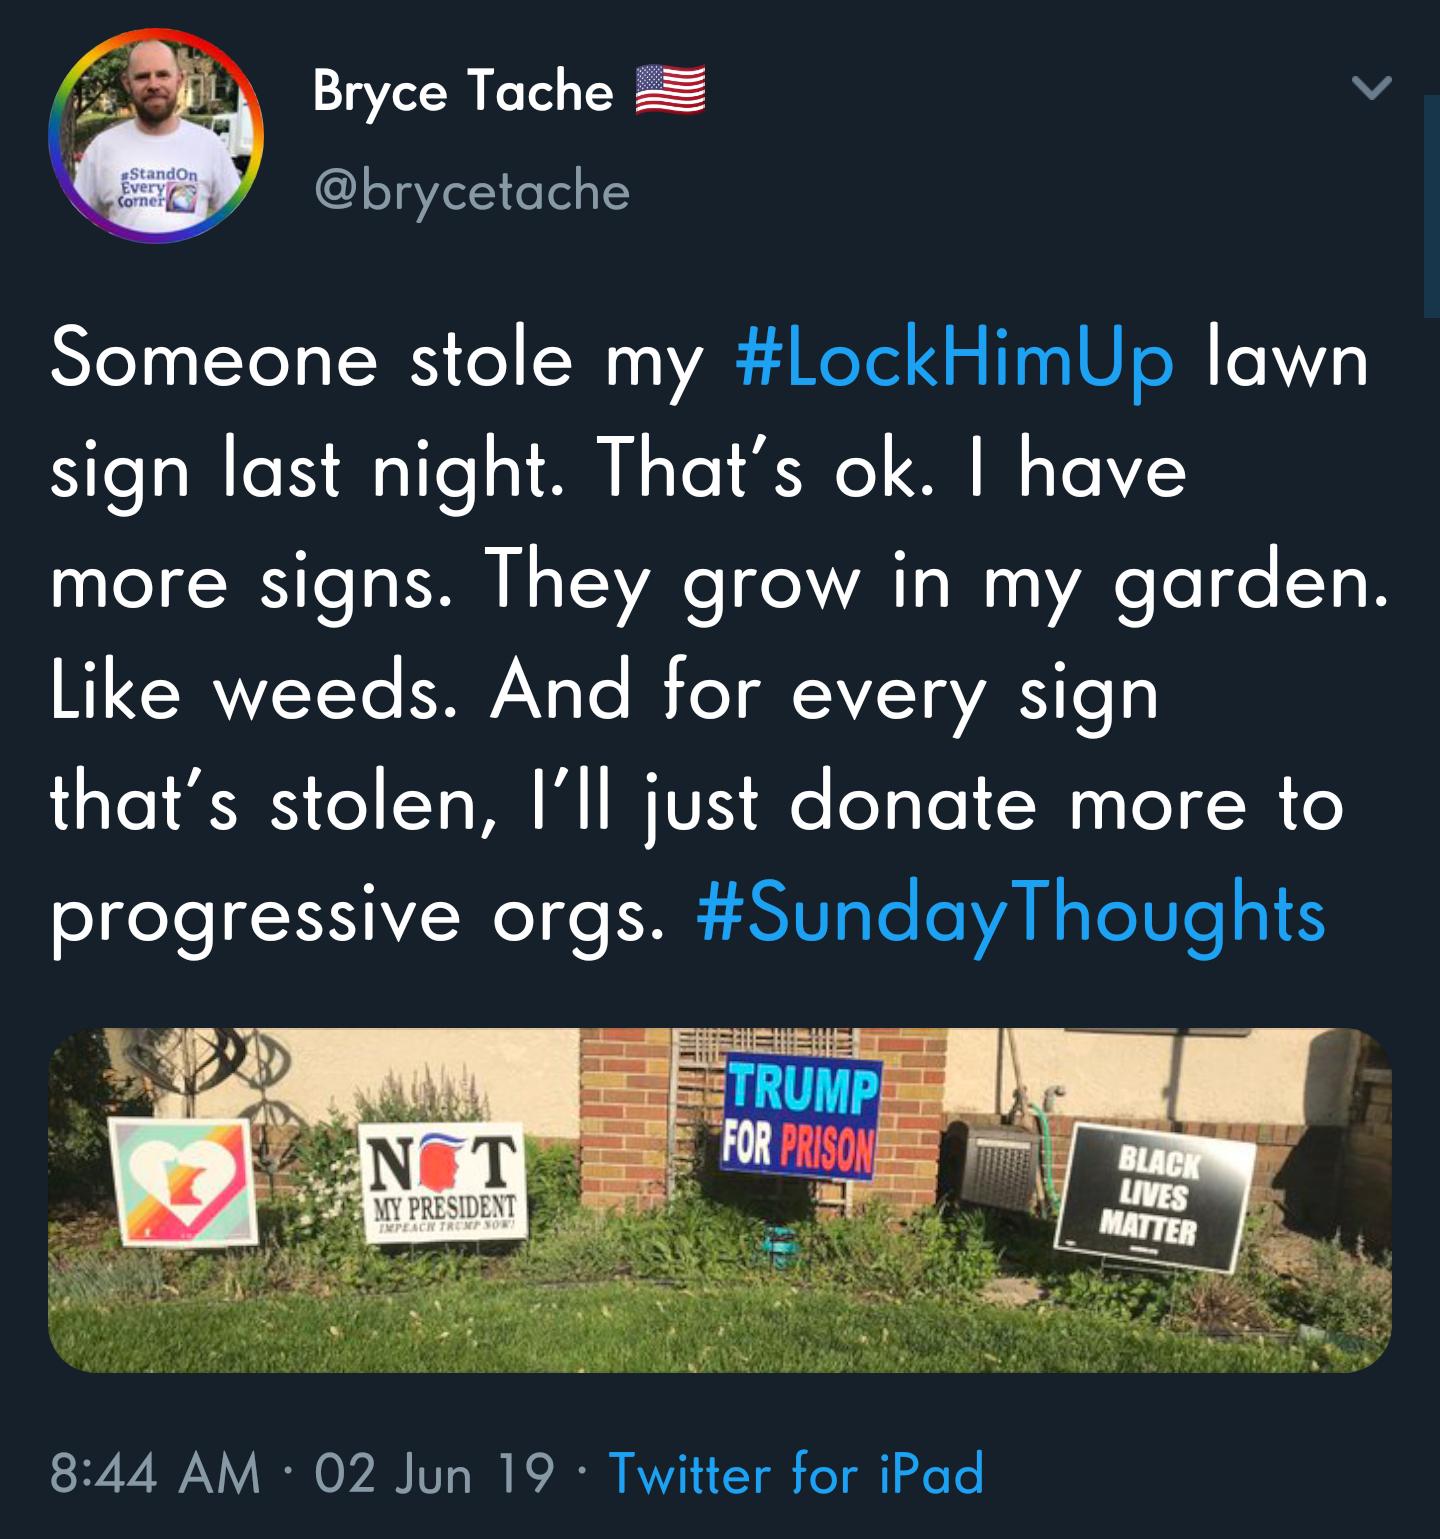 grass - Bryce Tache Standon Every Corner Someone stole my HimUp lawn sign last night. That's ok. I have more signs. They grow in my garden. weeds. And for every sign that's stolen, I'll just donate more to progressive orgs. Thoughts Trump For Prison Black